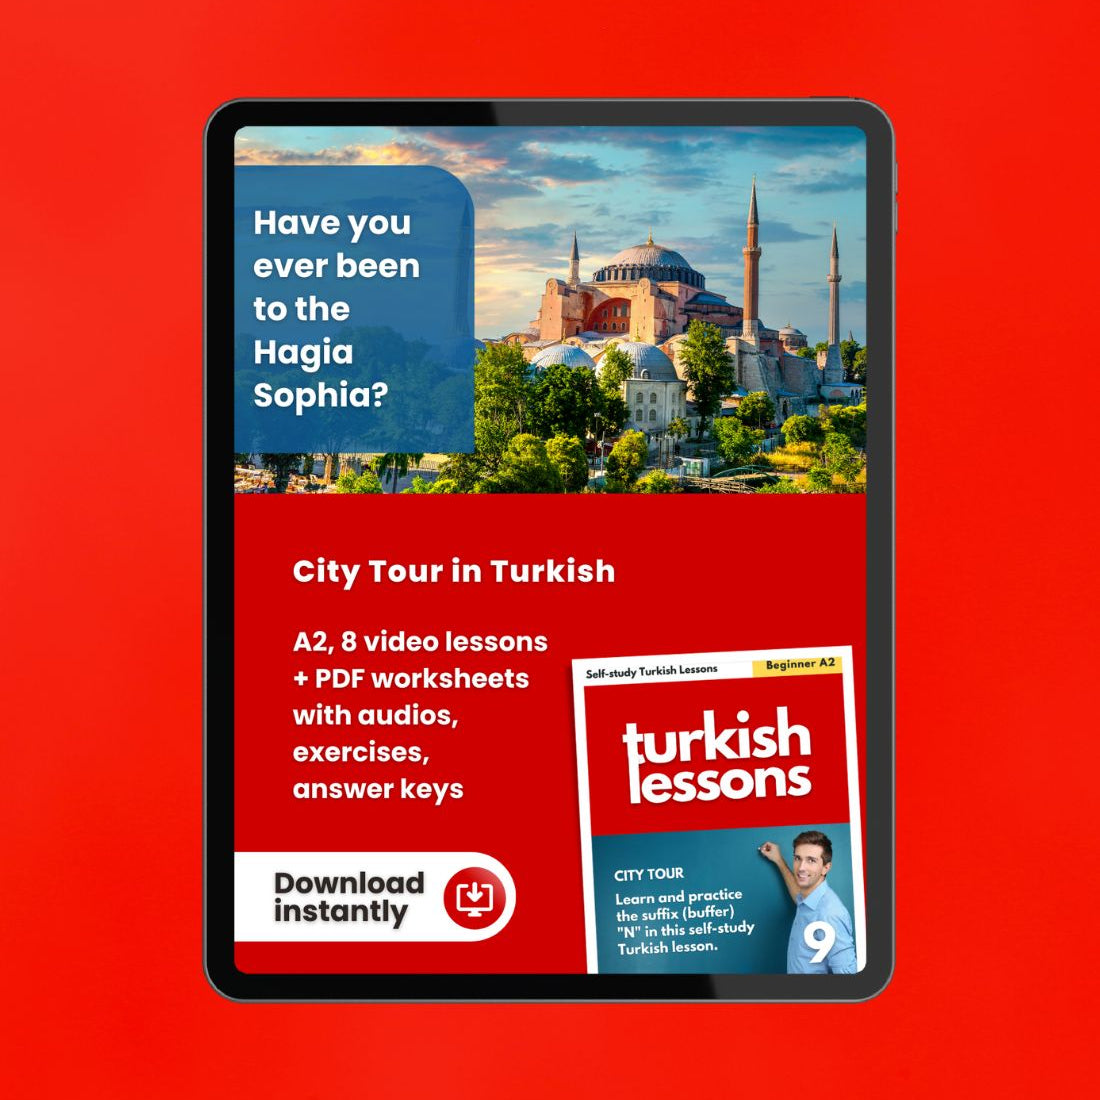 turkish lessons a2 - city tour in turkish language